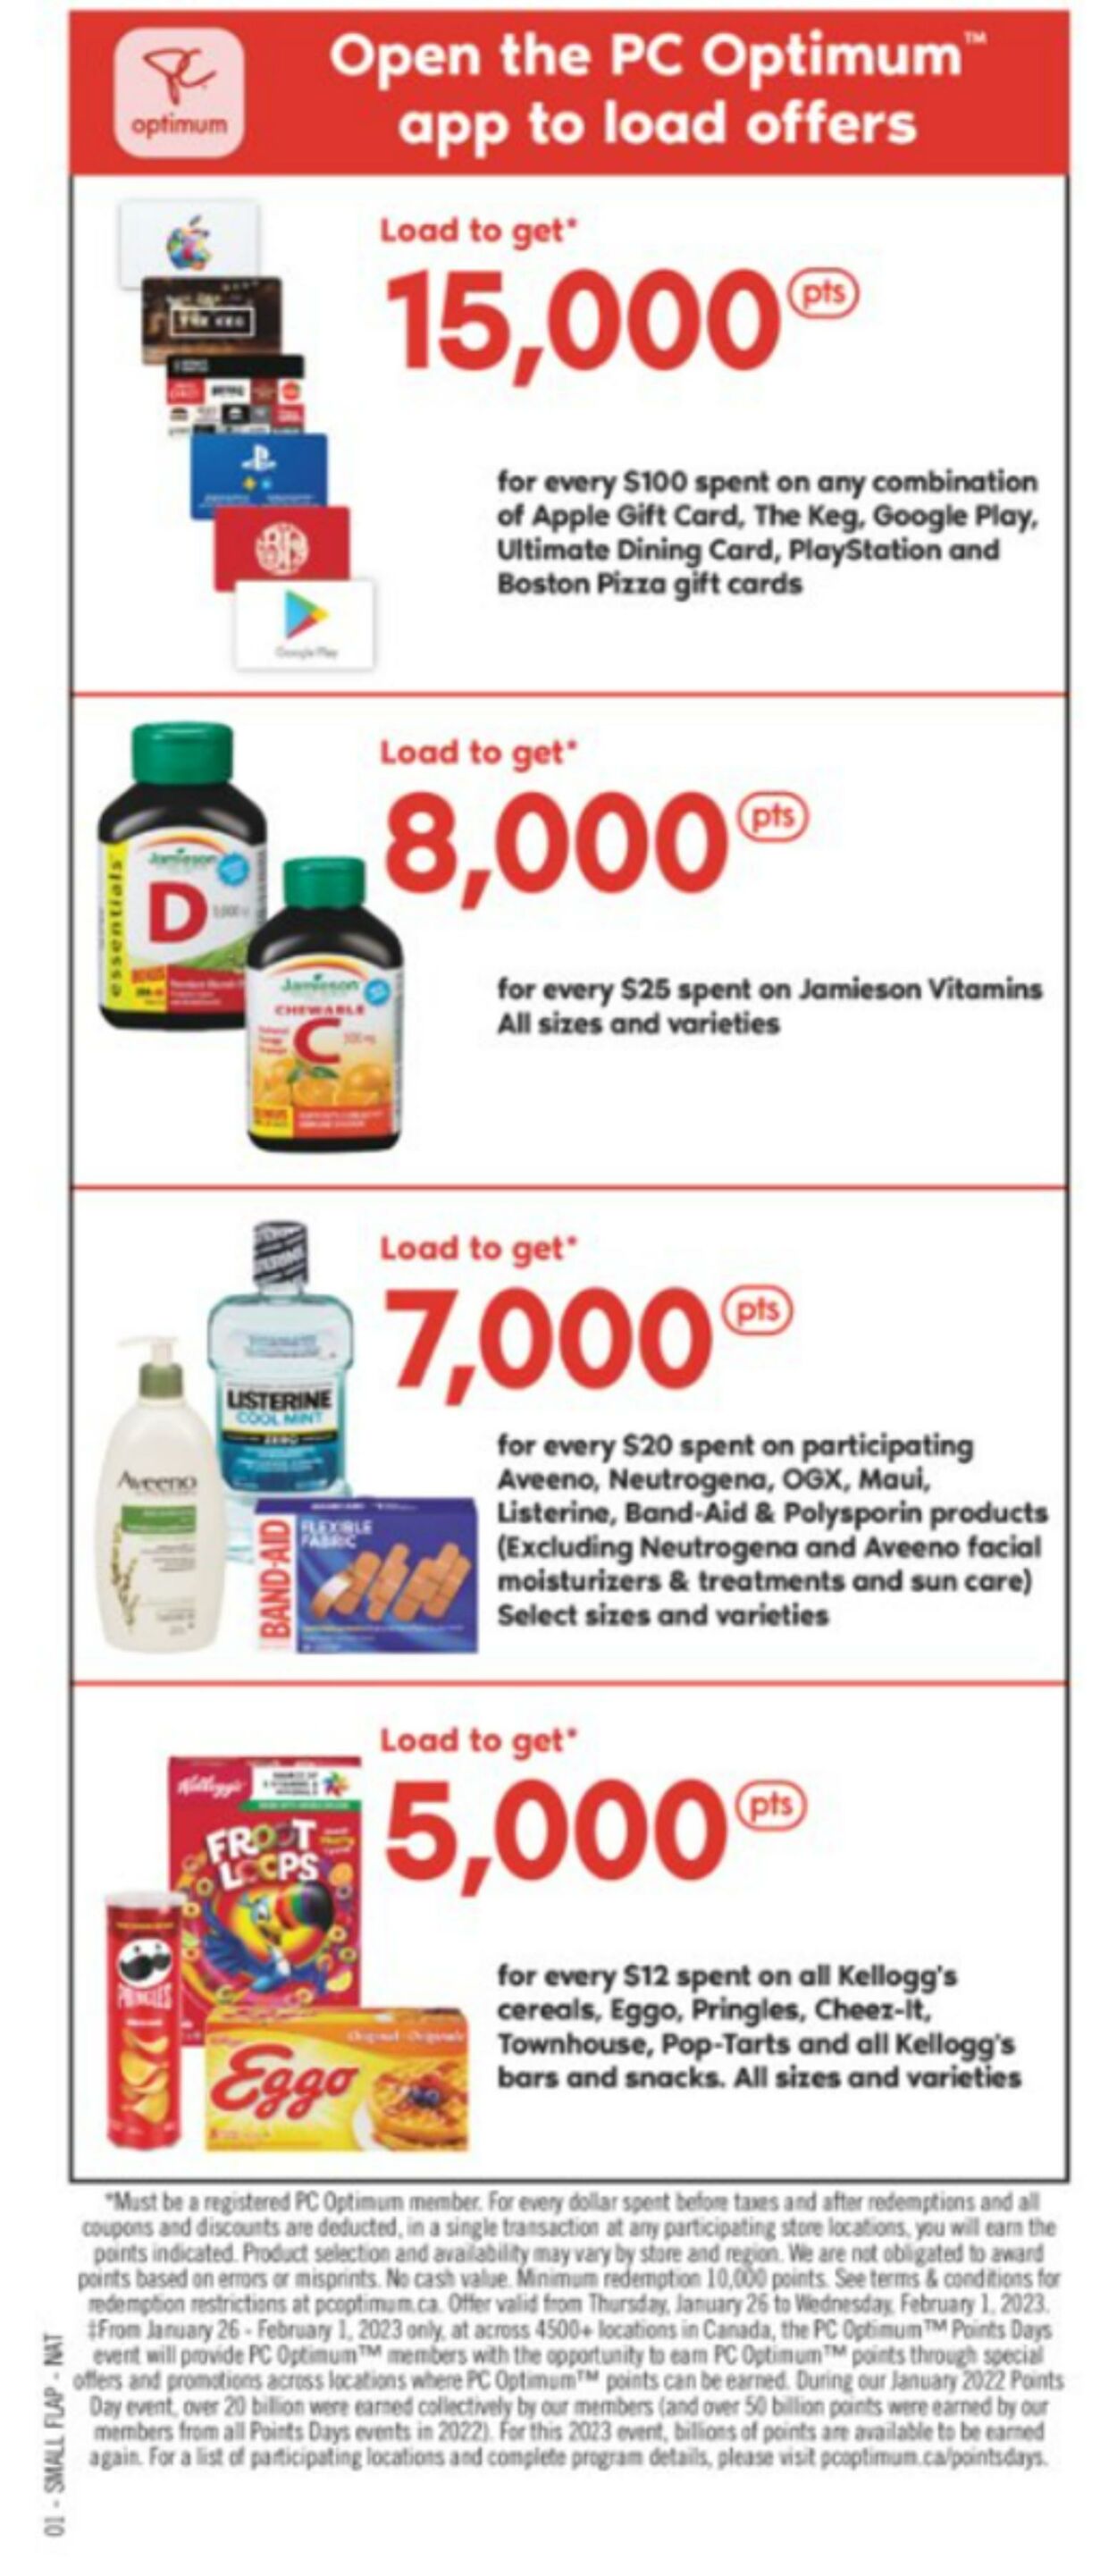 Circulaire Shoppers Drug Mart 28.01.2023 - 03.02.2023